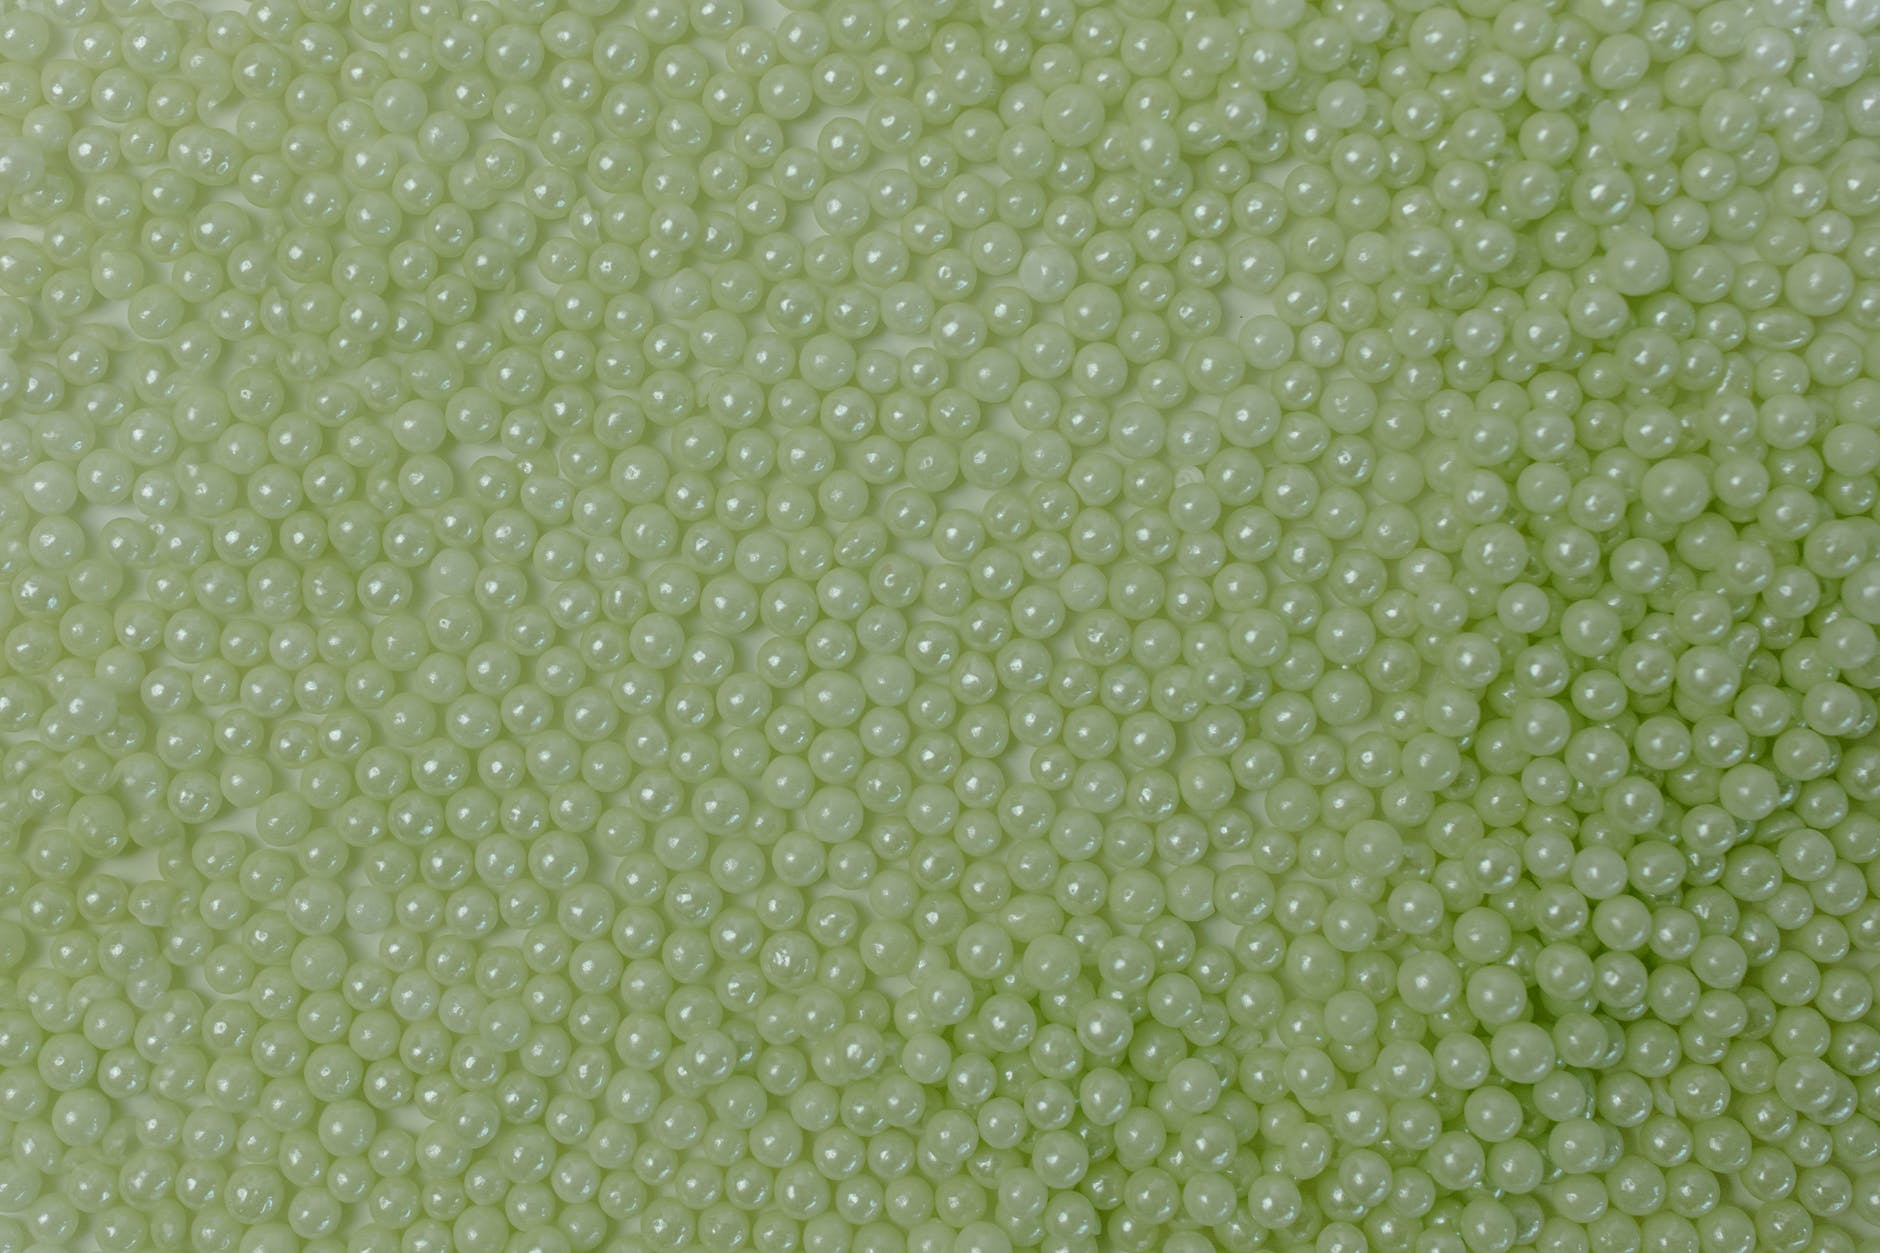 green candies in close up photography